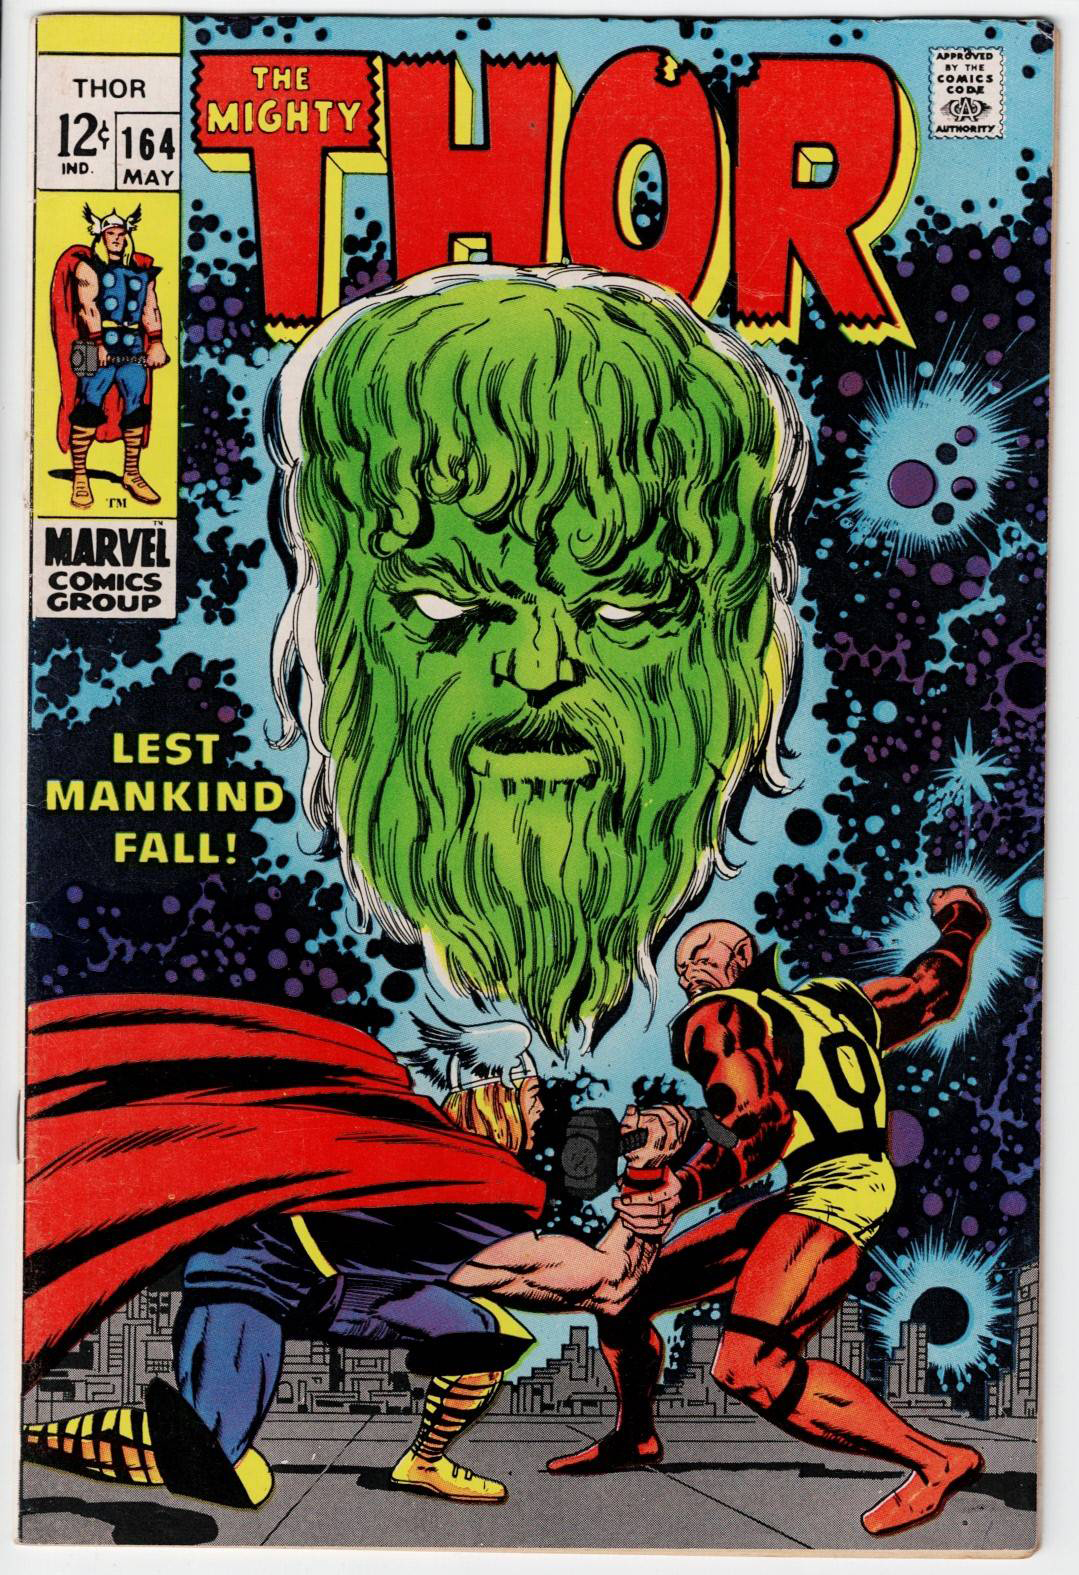 Thor #164 front